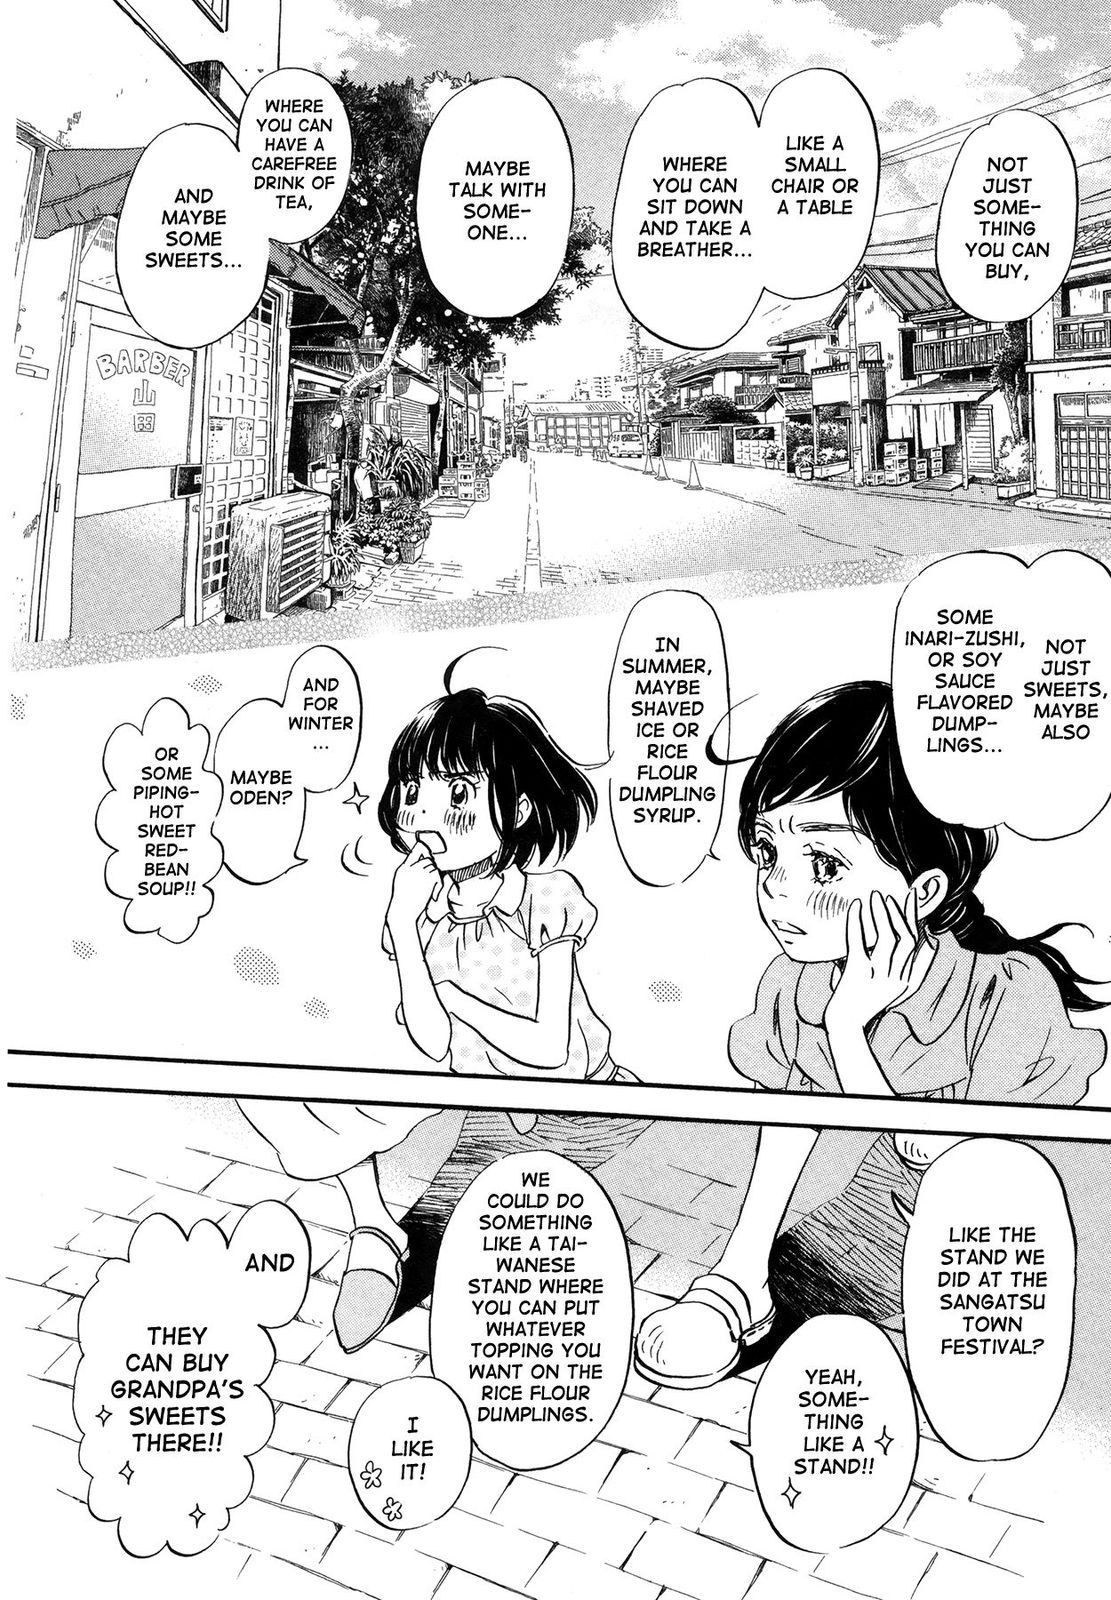 March Comes in Like a Lion, Chapter 140 Fluffy Treasure (EN) image 21